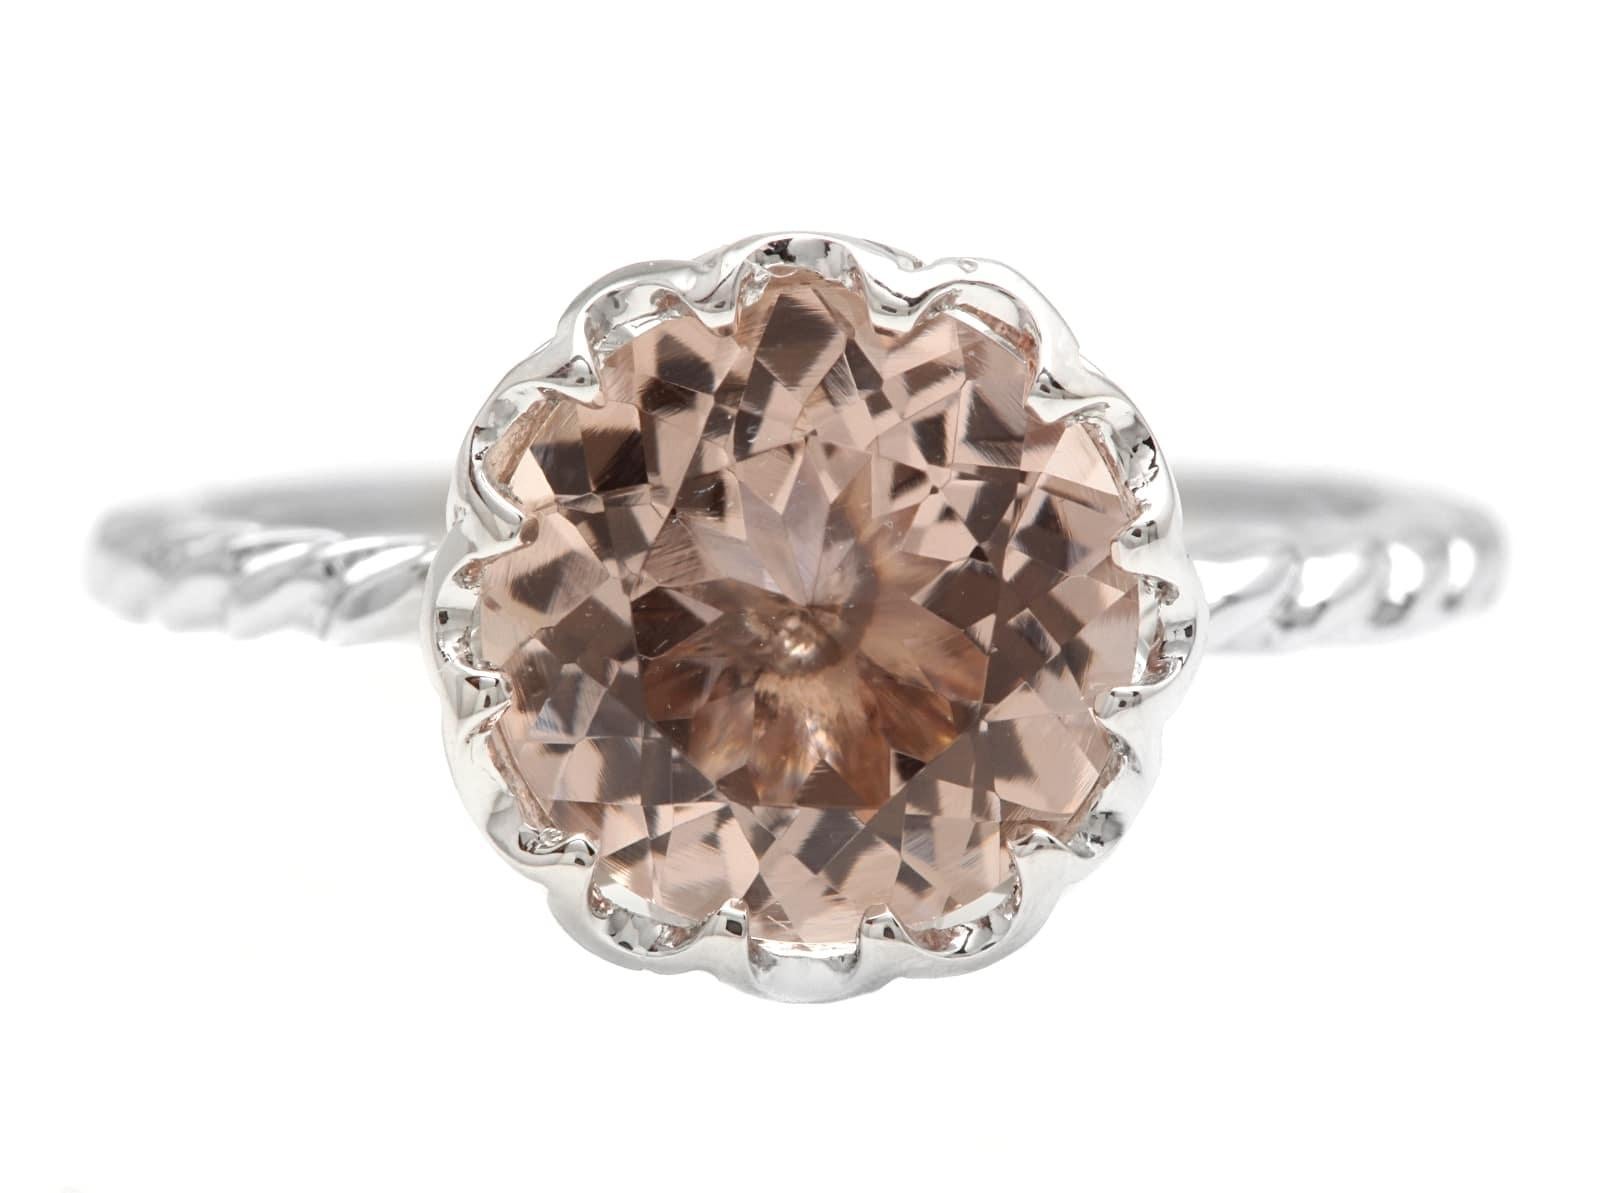 2.00 Carats Exquisite Natural Morganite 14K Solid White Gold Ring

Total Natural Morganite Weight is: Approx. 2.00 Carats 

Morganite Measures: Approx. 8.00mm

Ring size: 7 (Free sizing available upon request) 

Ring total weight: 2.1